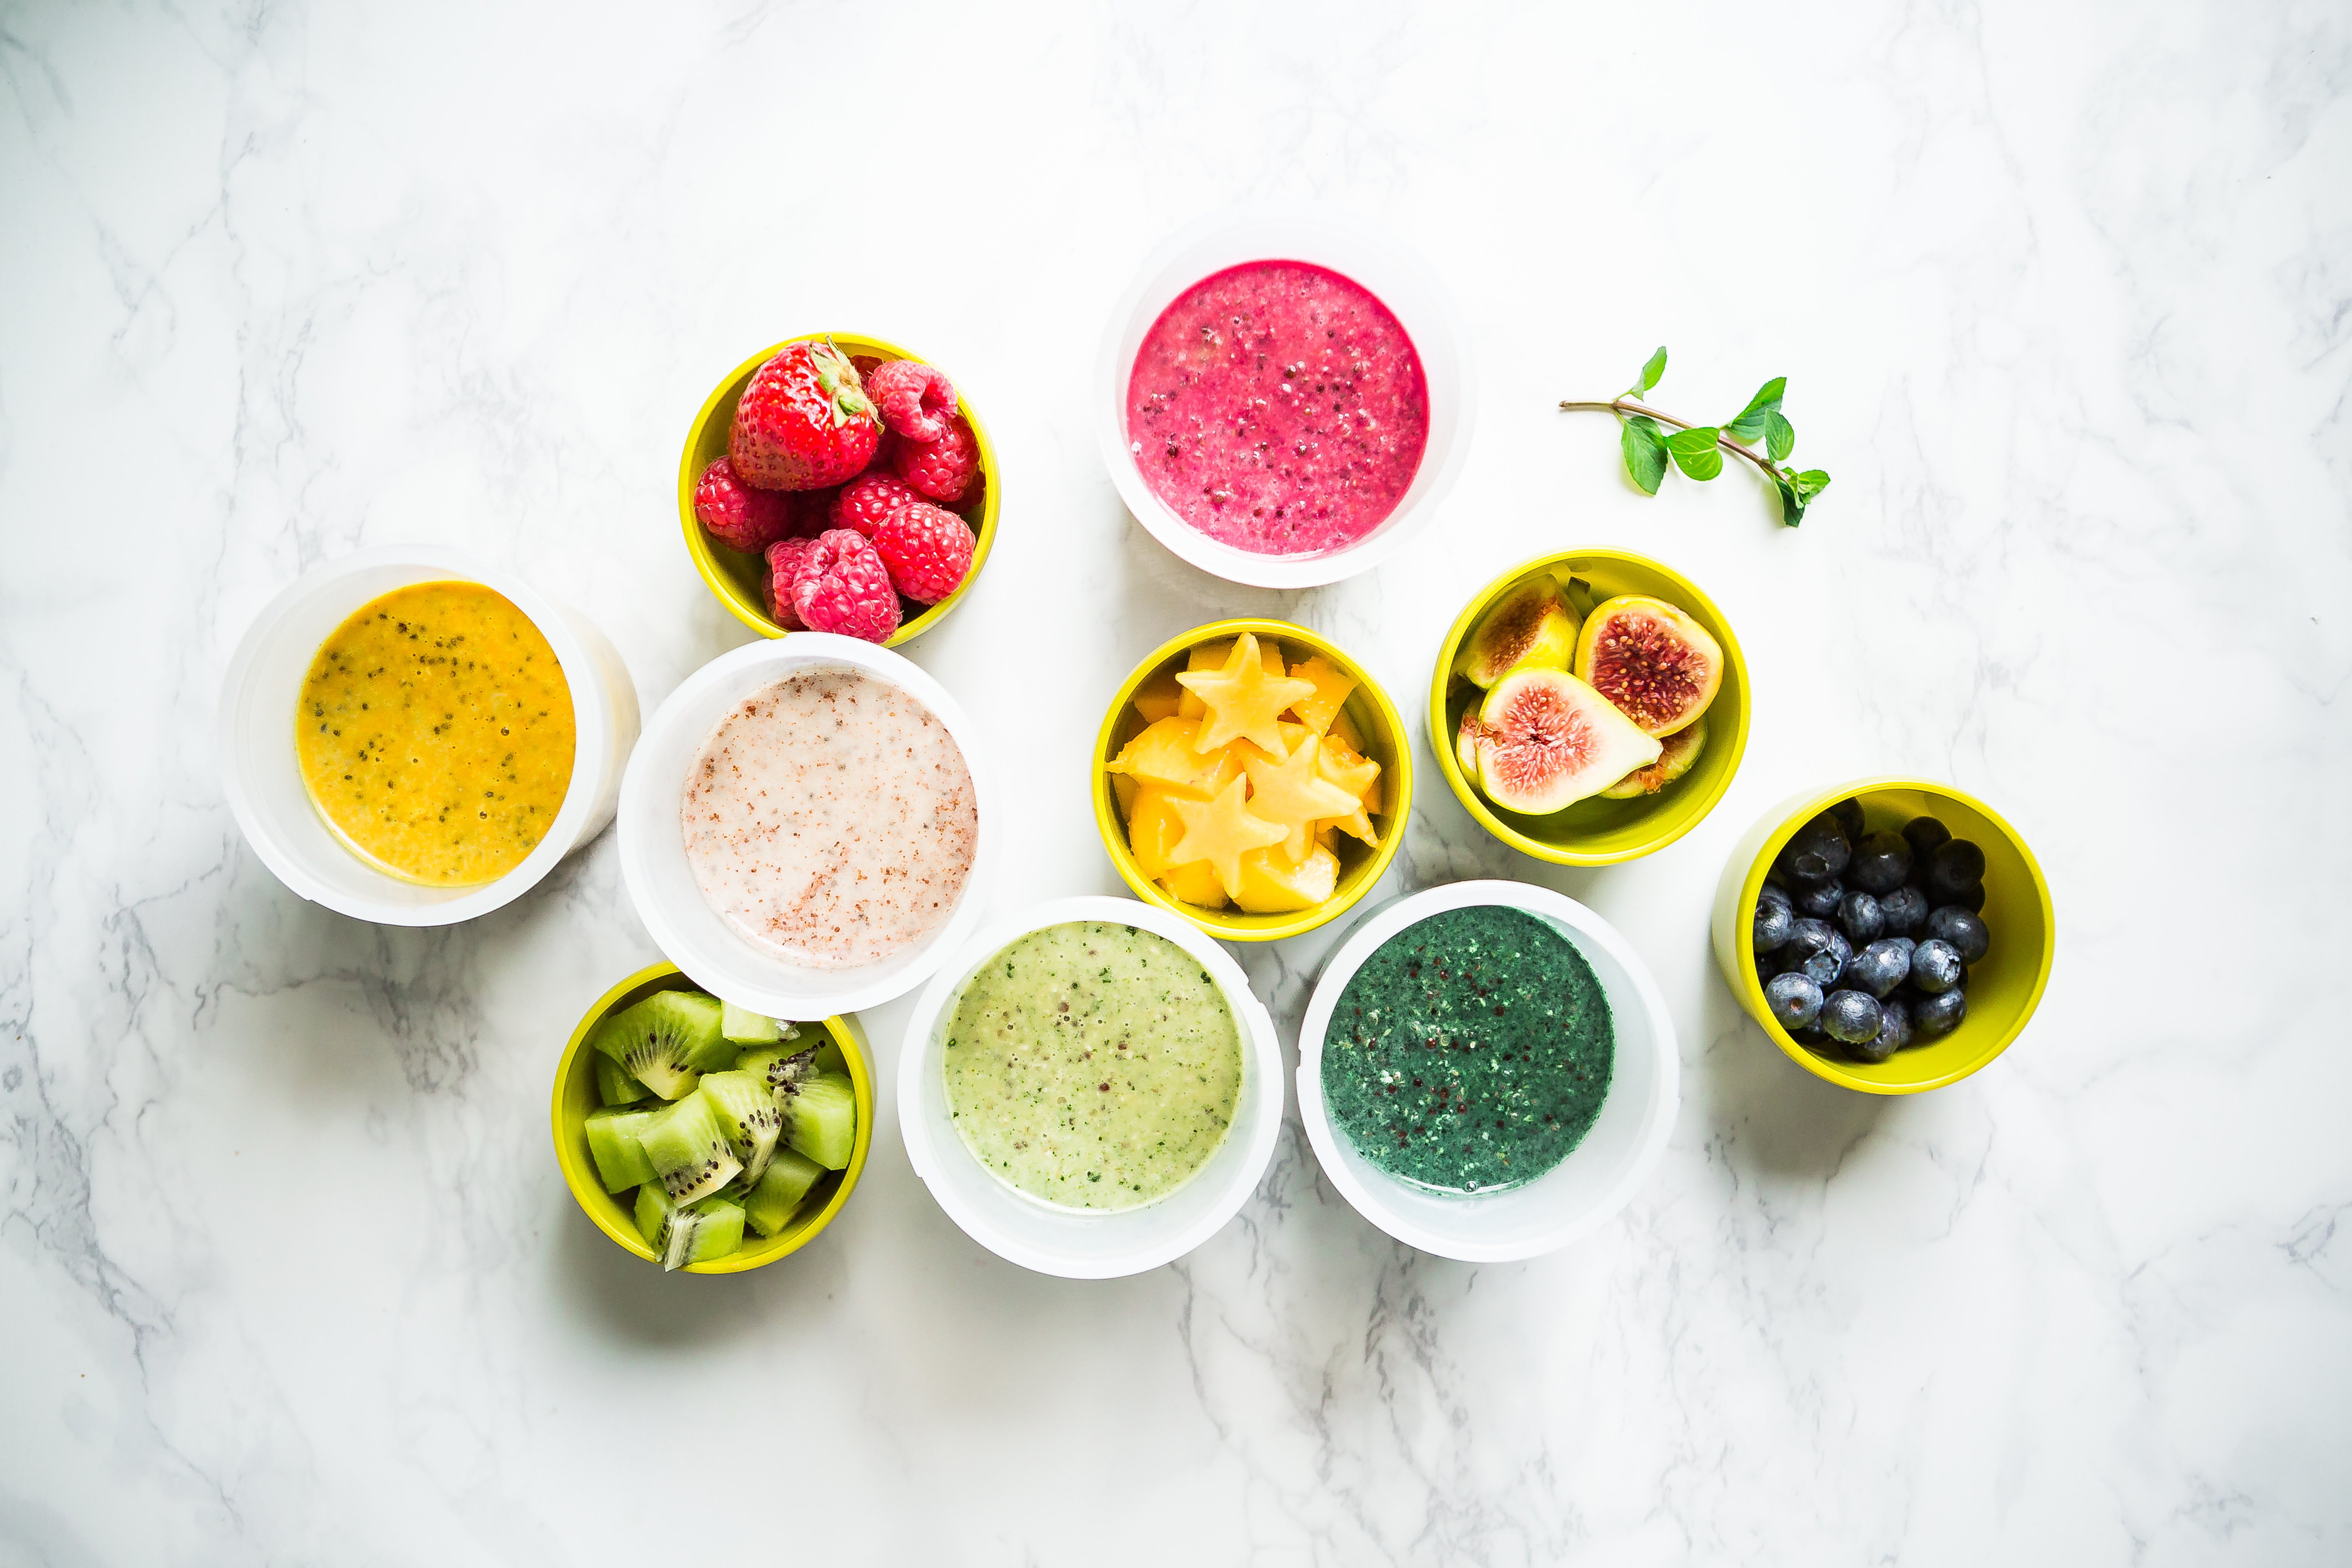 Make Ahead Superfood Power-Up Smoothie Cups